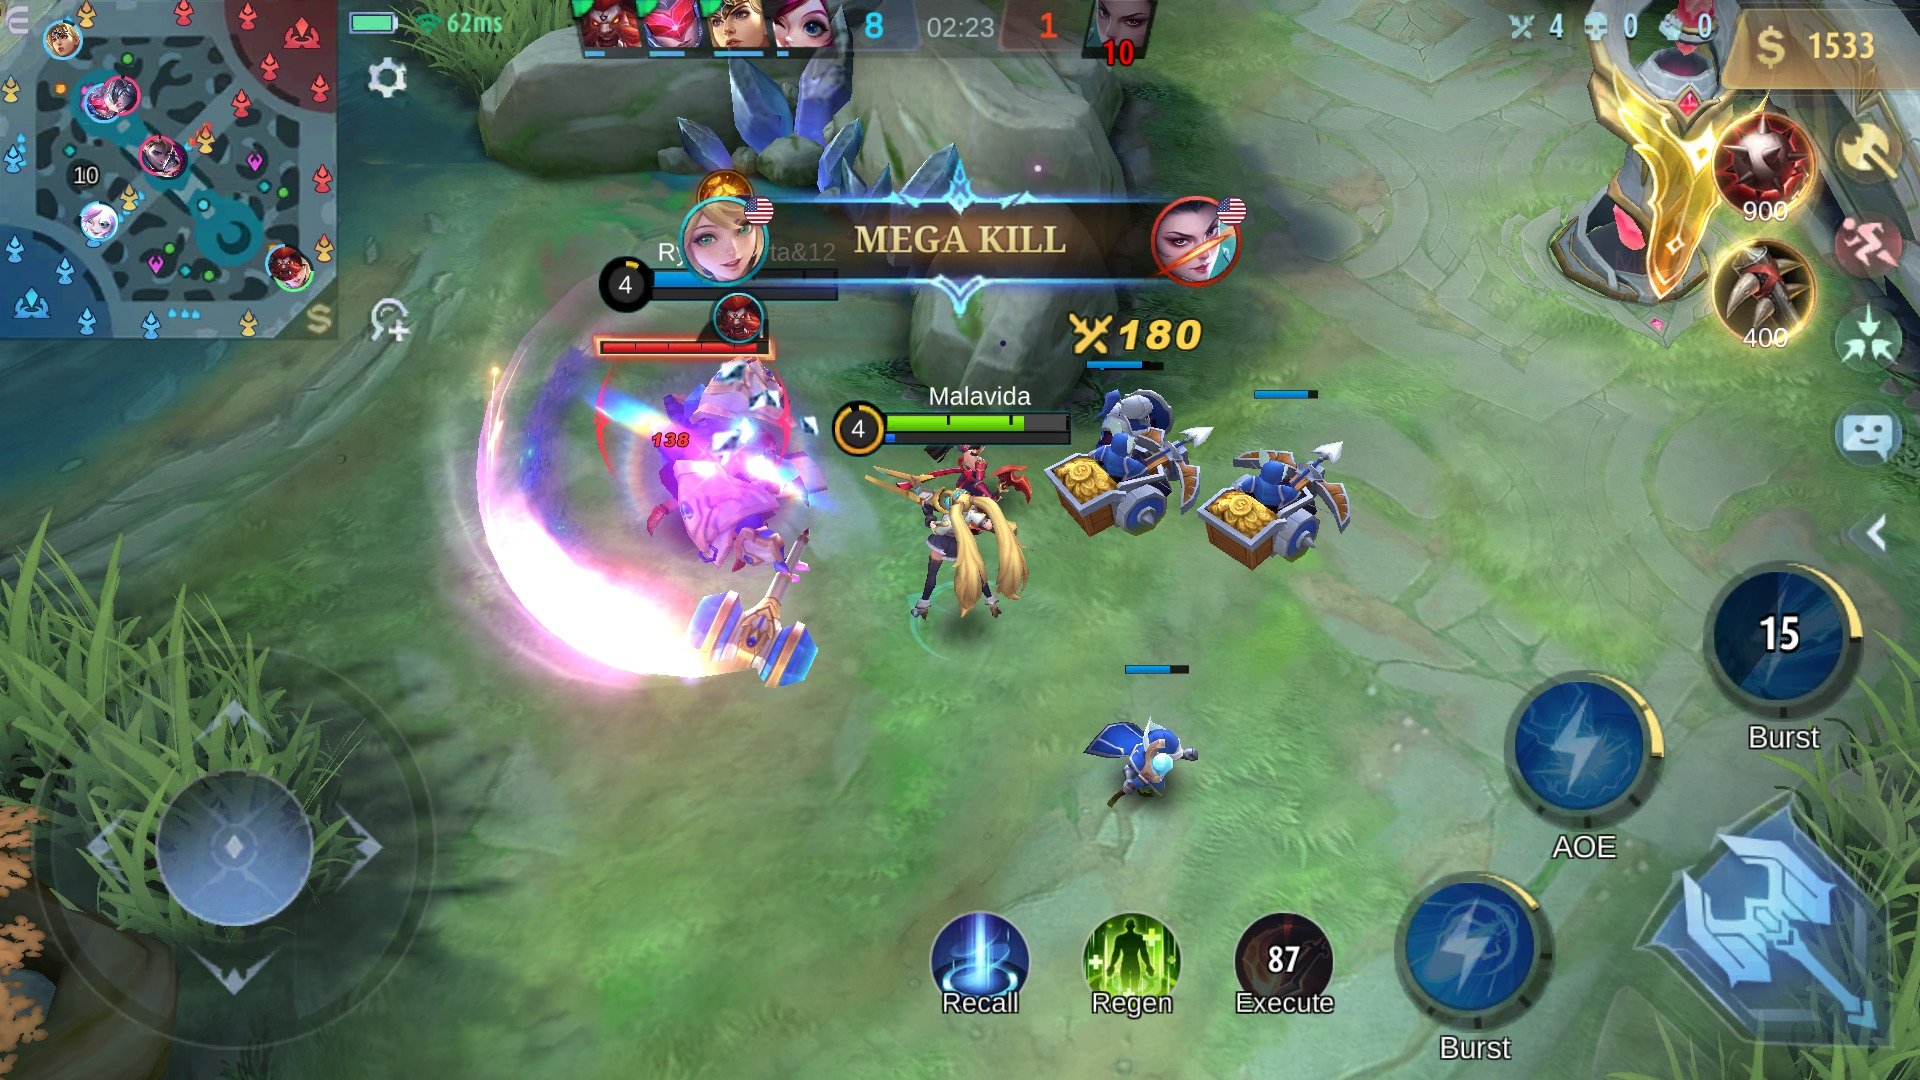 Download & Play Mobile Legends: Bang Bang on PC & Mac in